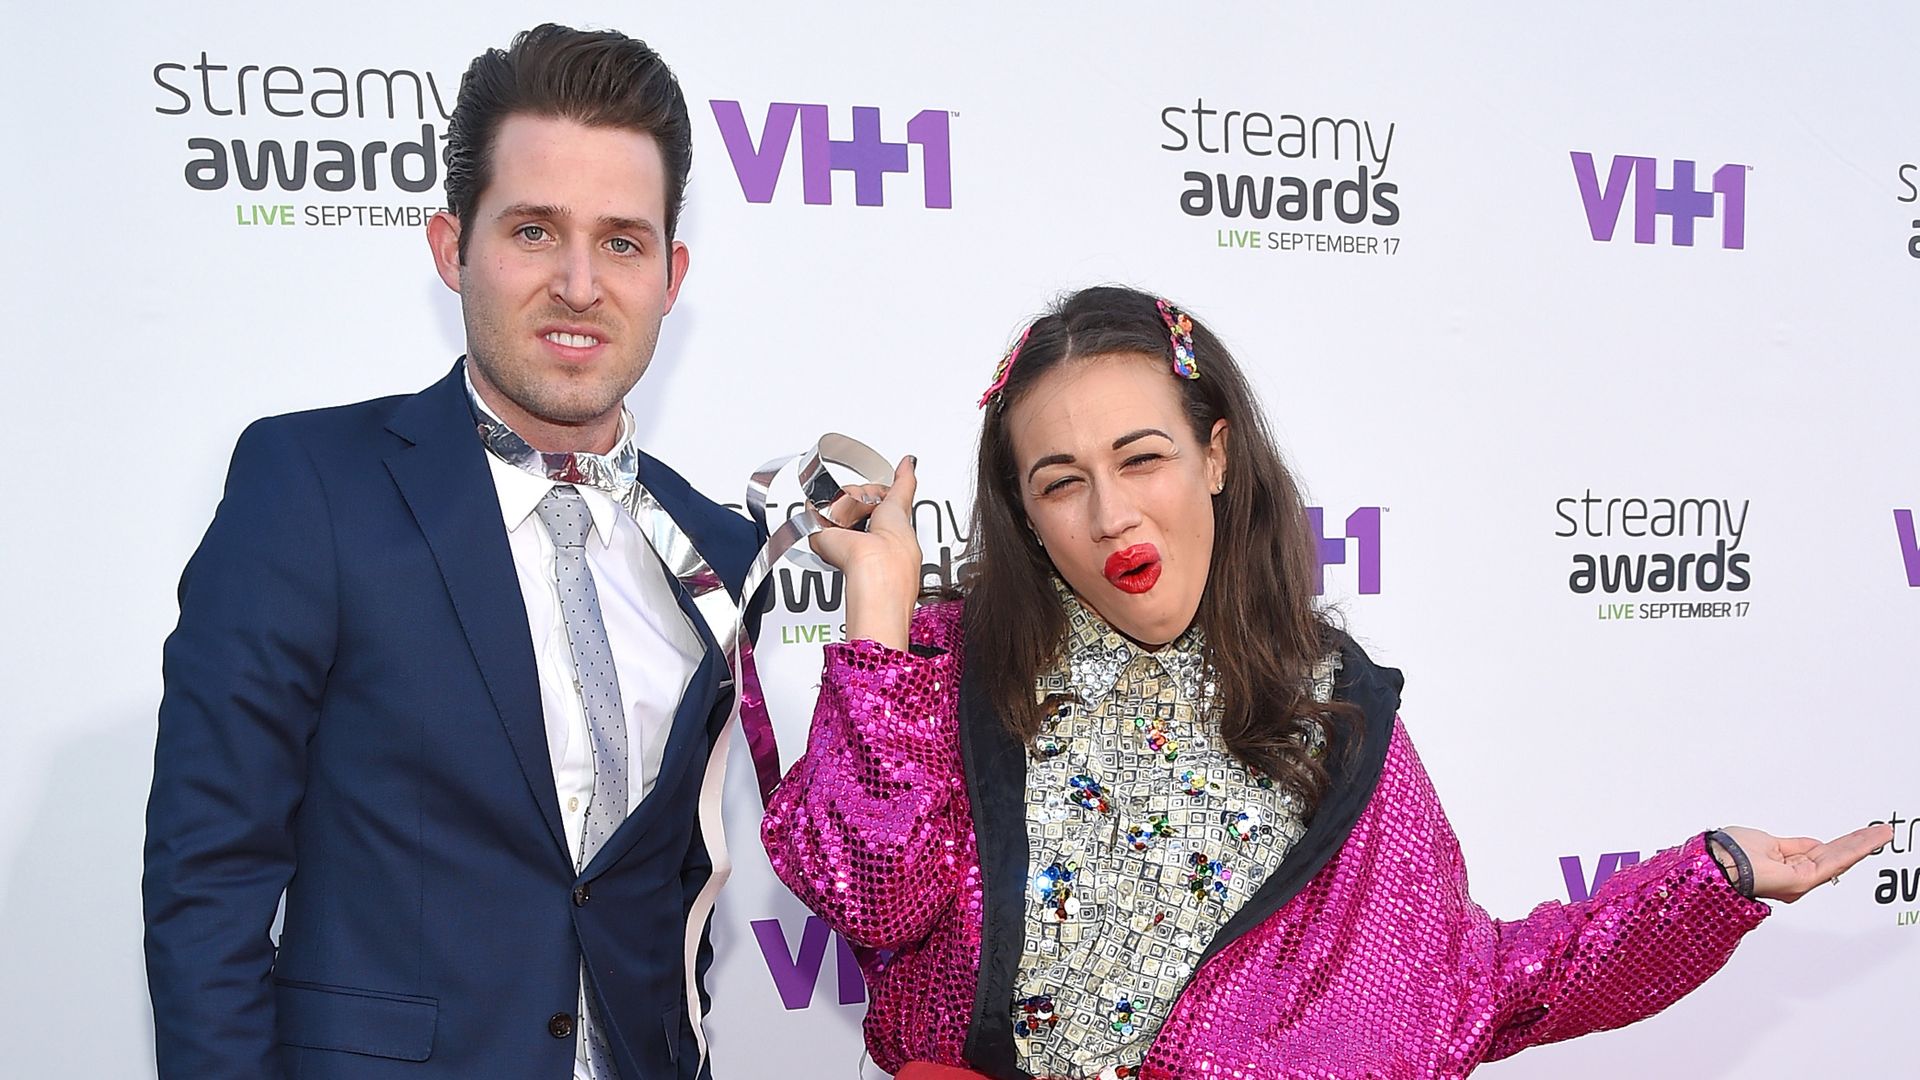 Internet personalities Joshua David Evans (L) and Colleen Ballinger, aka Miranda Sings attends VH1's 5th Annual Streamy Awards at the Hollywood Palladium on Thursday, September 17, 2015 in Los Angeles, California.  (Photo by Mike Windle/Getty Images for D